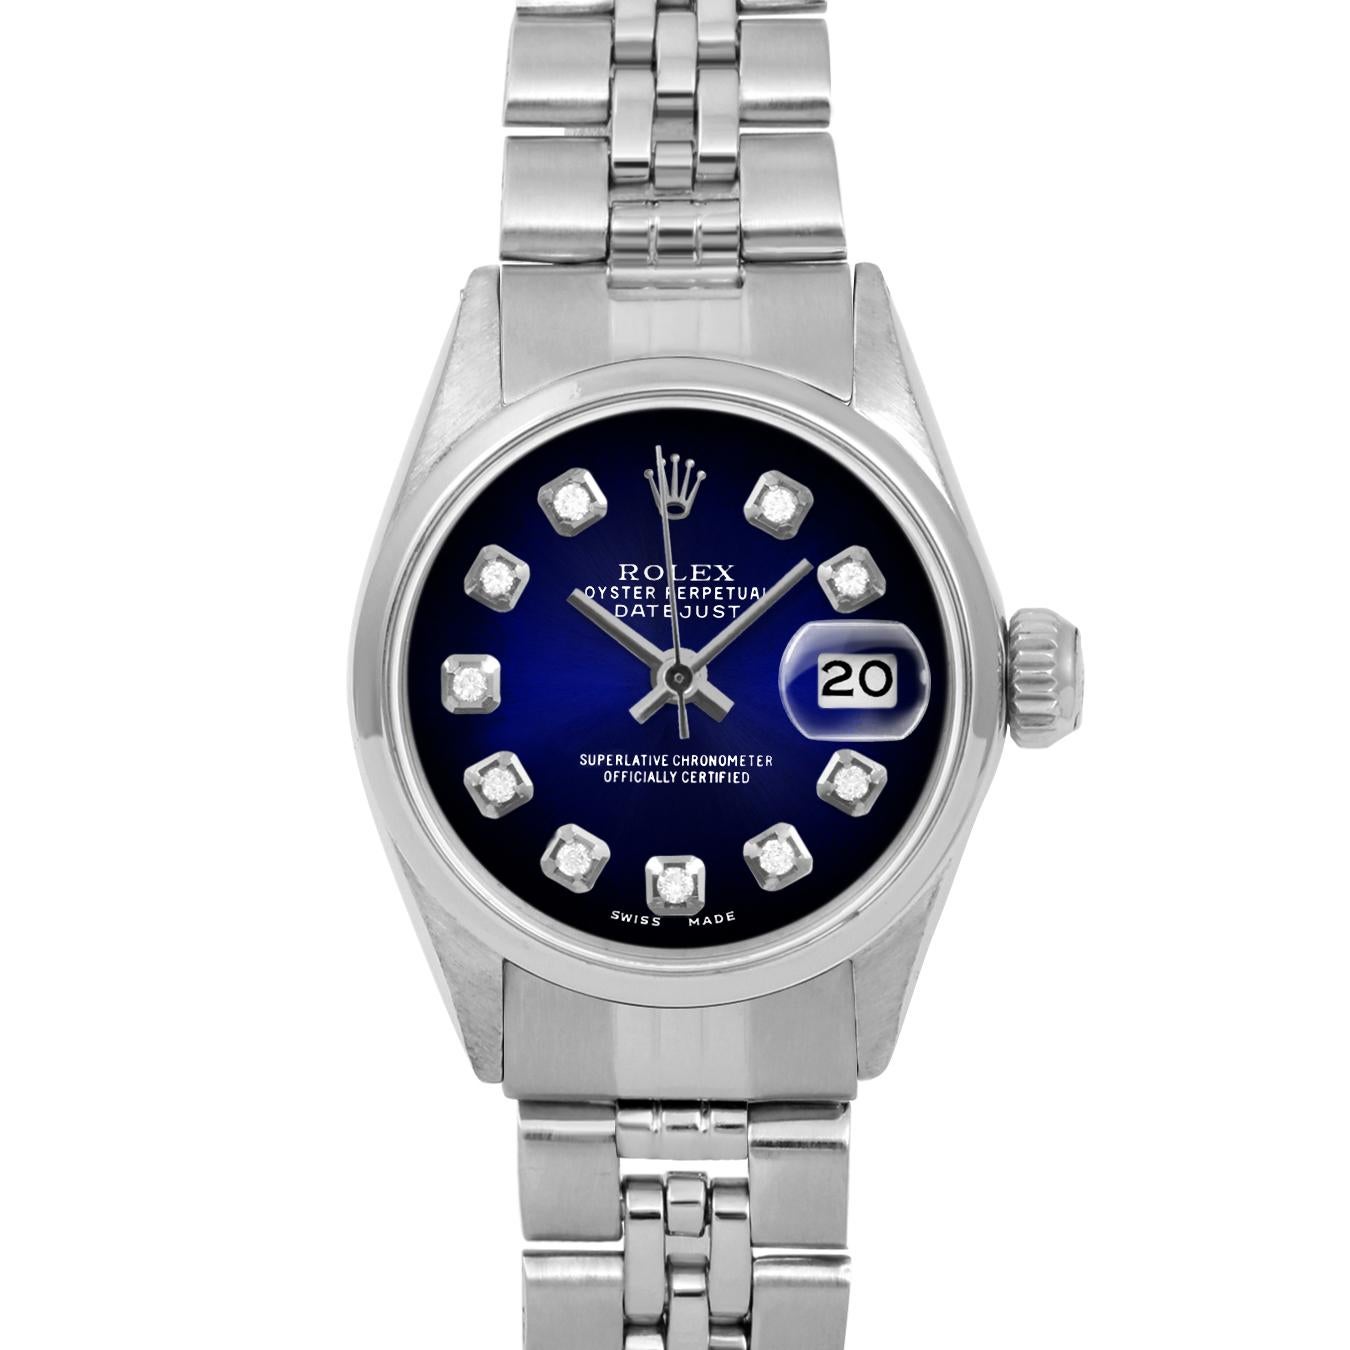 Brand : Rolex
Model : Datejust (Non-Quickset Model)
Gender : Ladies
Metals : Stainless Steel
Case Size : 24 mm

Dial : Custom Blue Vignette Diamond Dial (This dial is not original Rolex And has been added aftermarket yet is a beautiful Custom